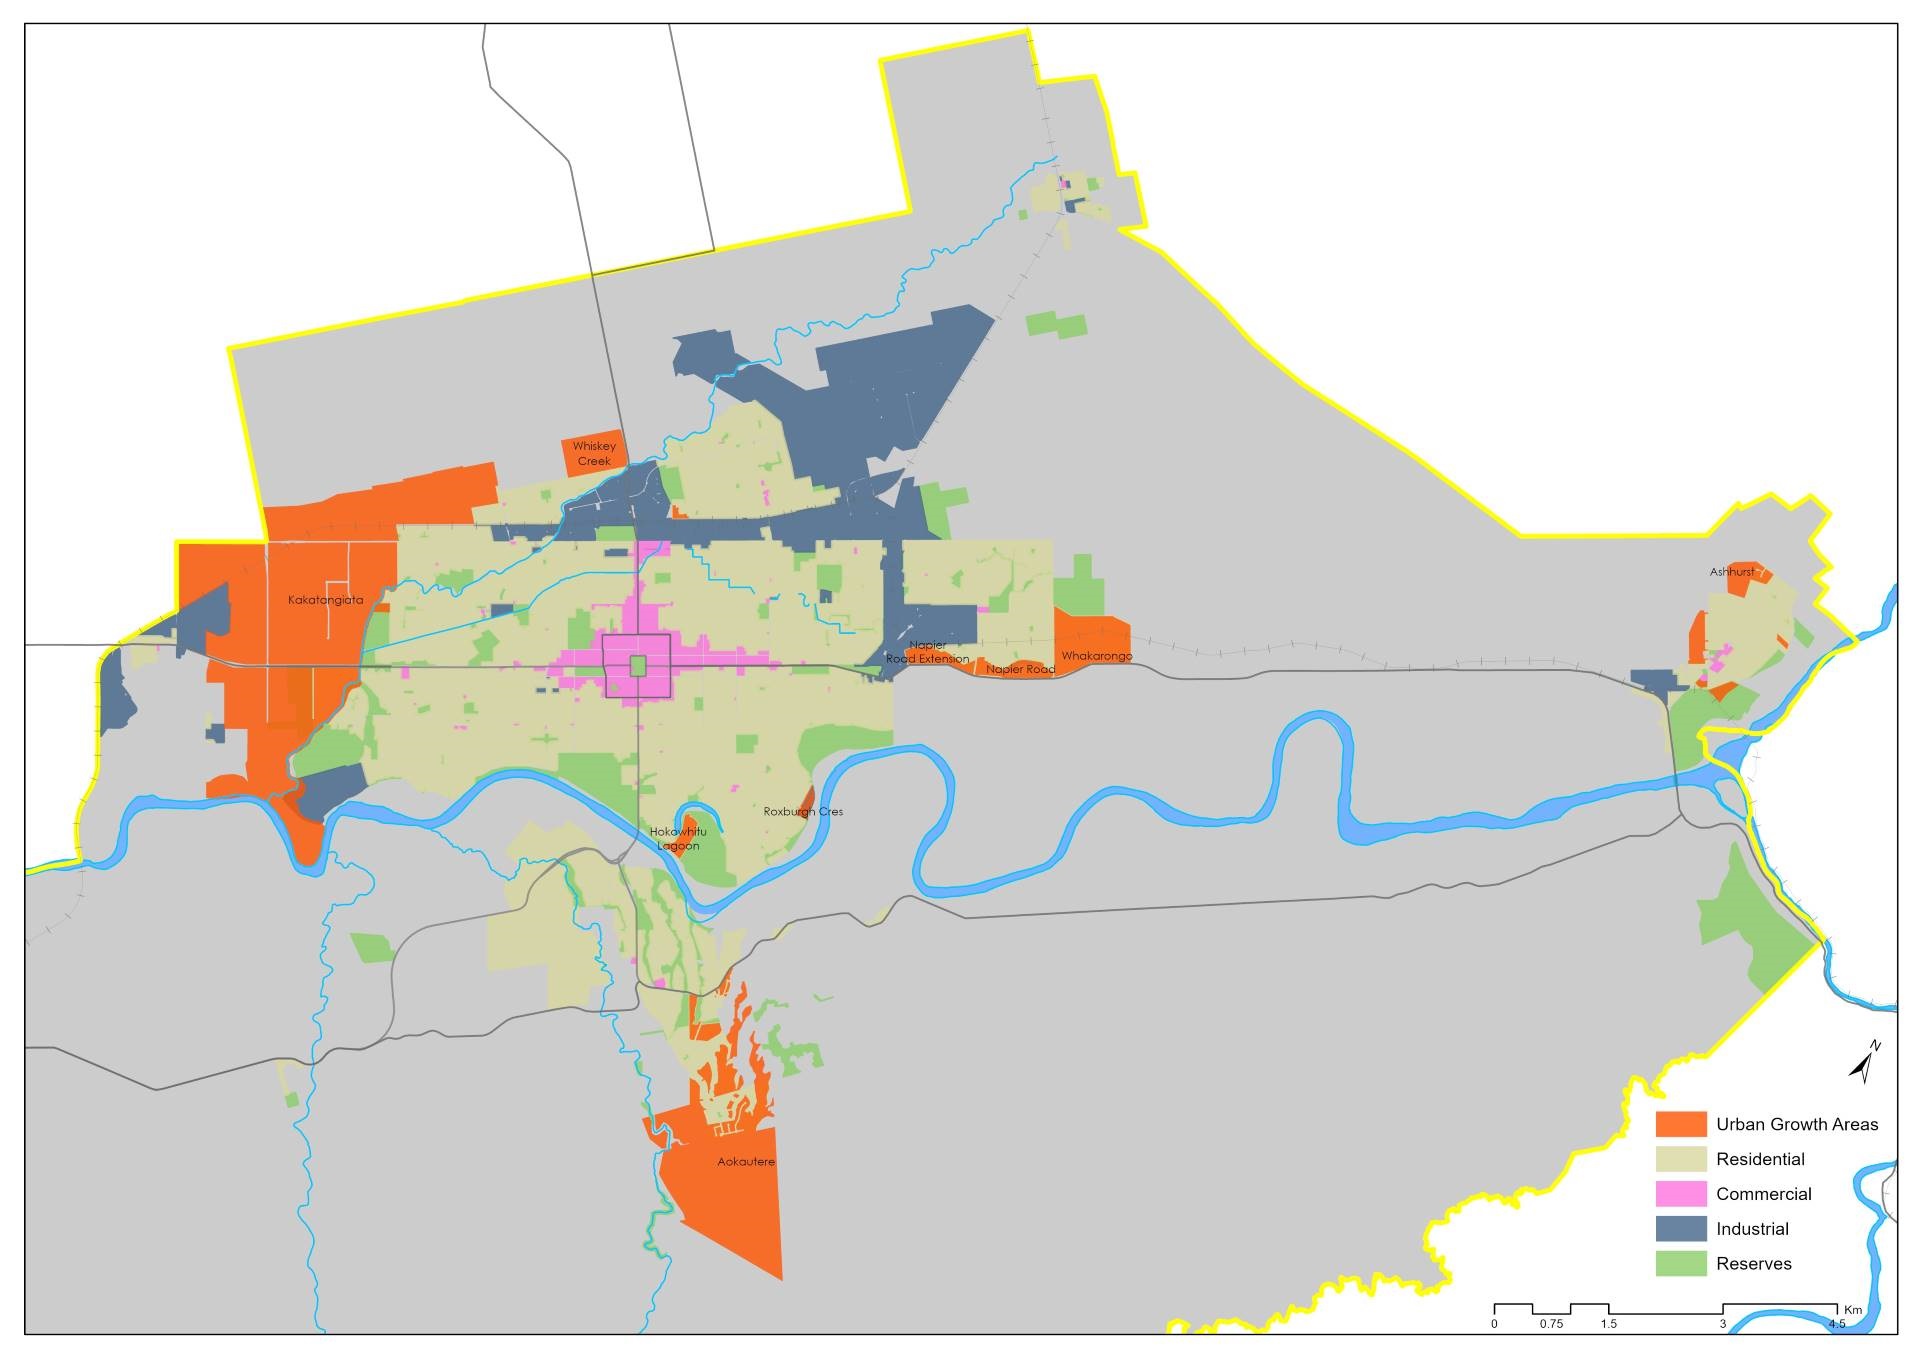 Map showing areas in Palmy targeted for rezoning so the city can build the homes we need to accommodate the predicted increase in residents over the next 30 years.